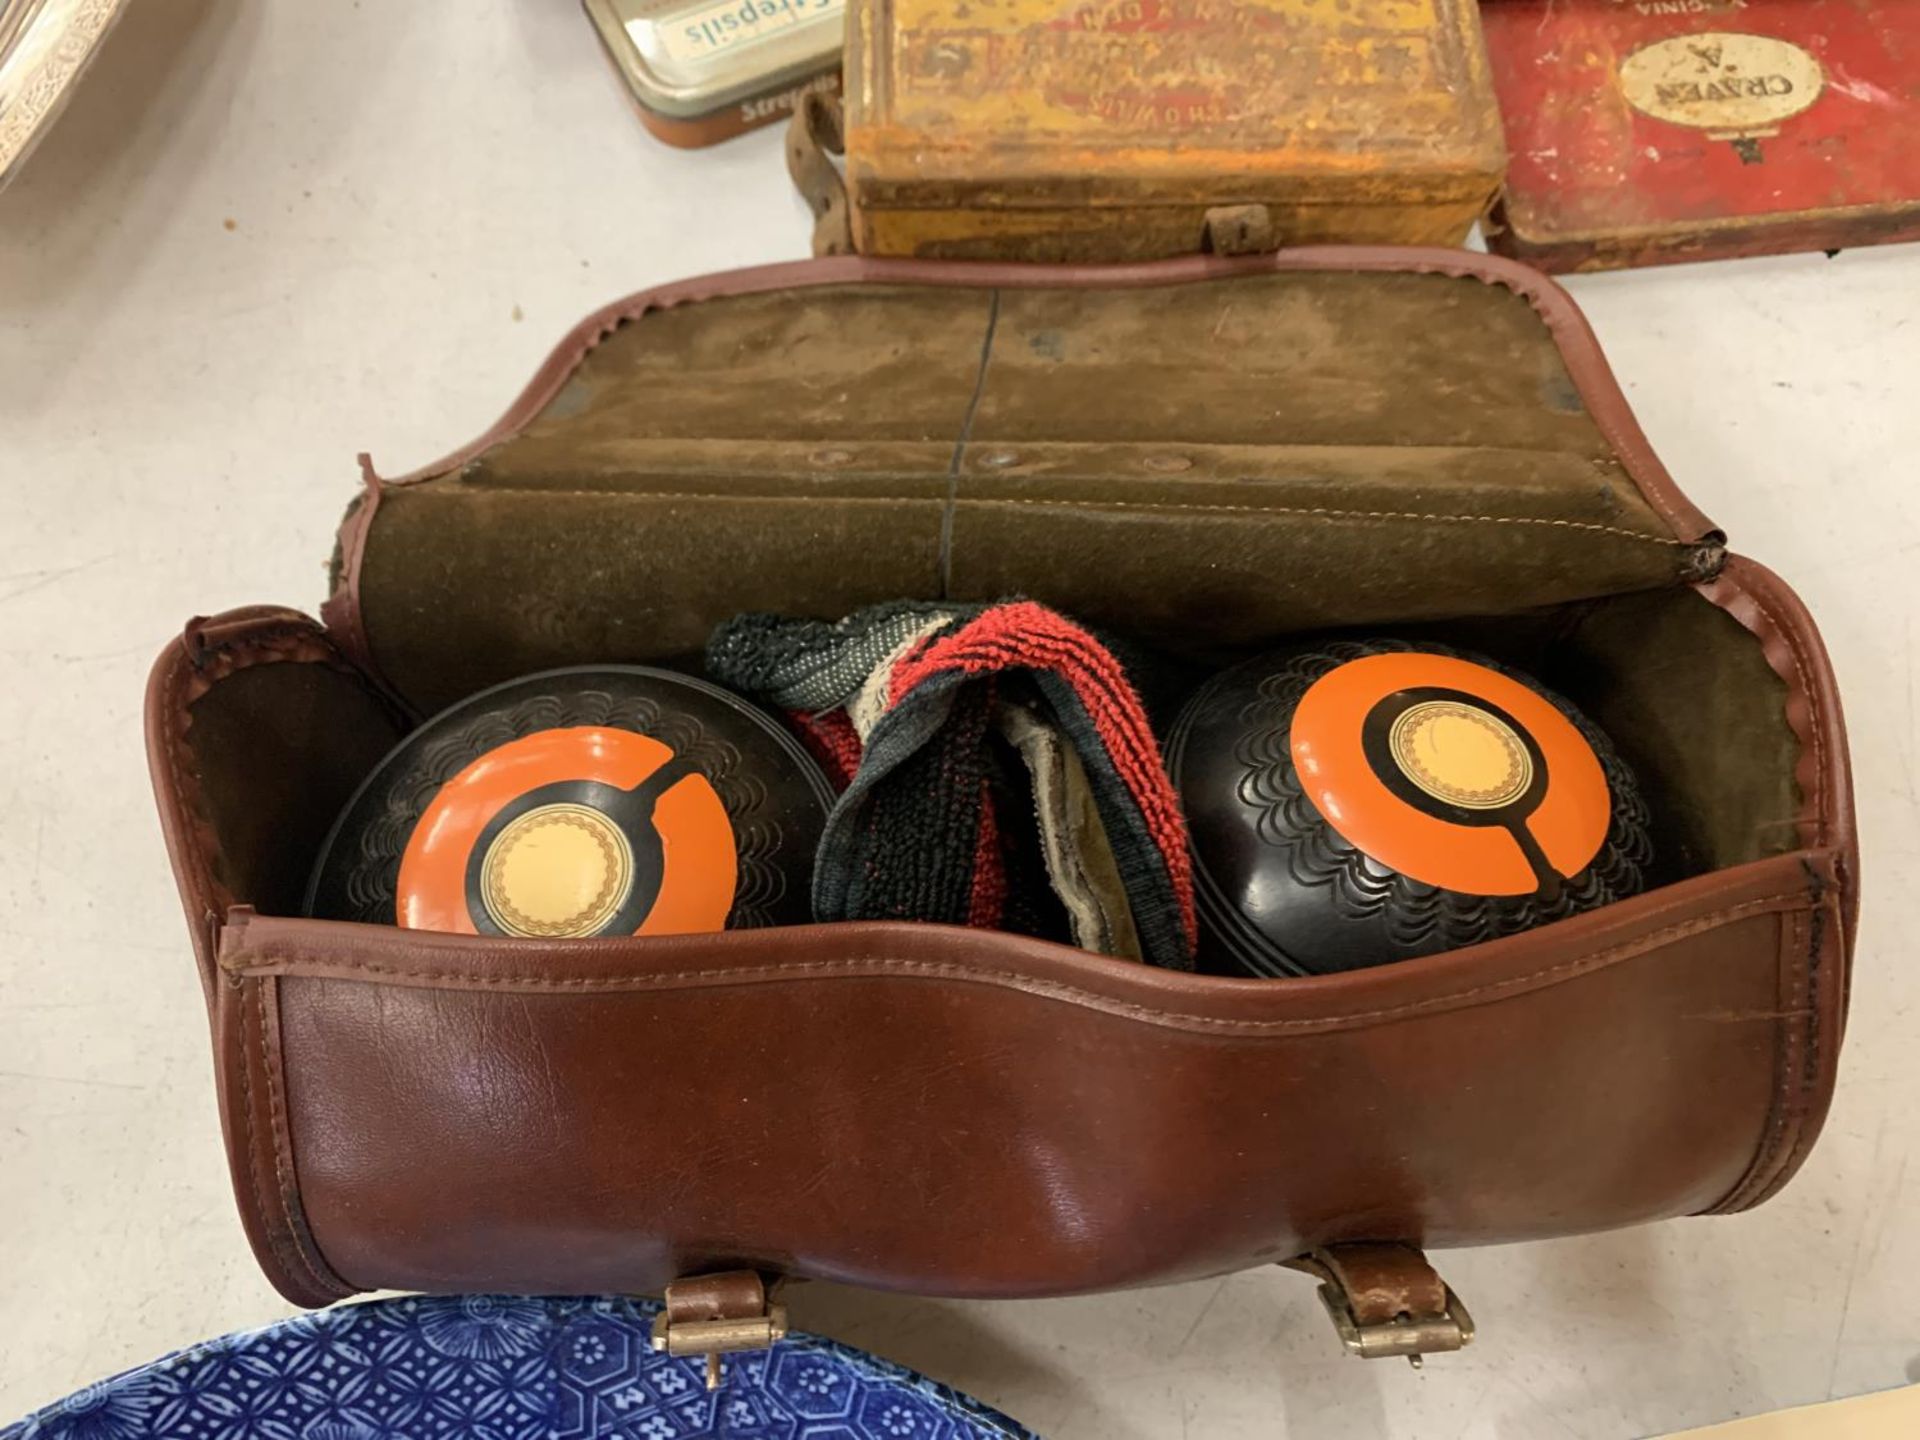 A PAIR OF BOWLING BOWLS IN A CARRYING CASE - Image 2 of 4